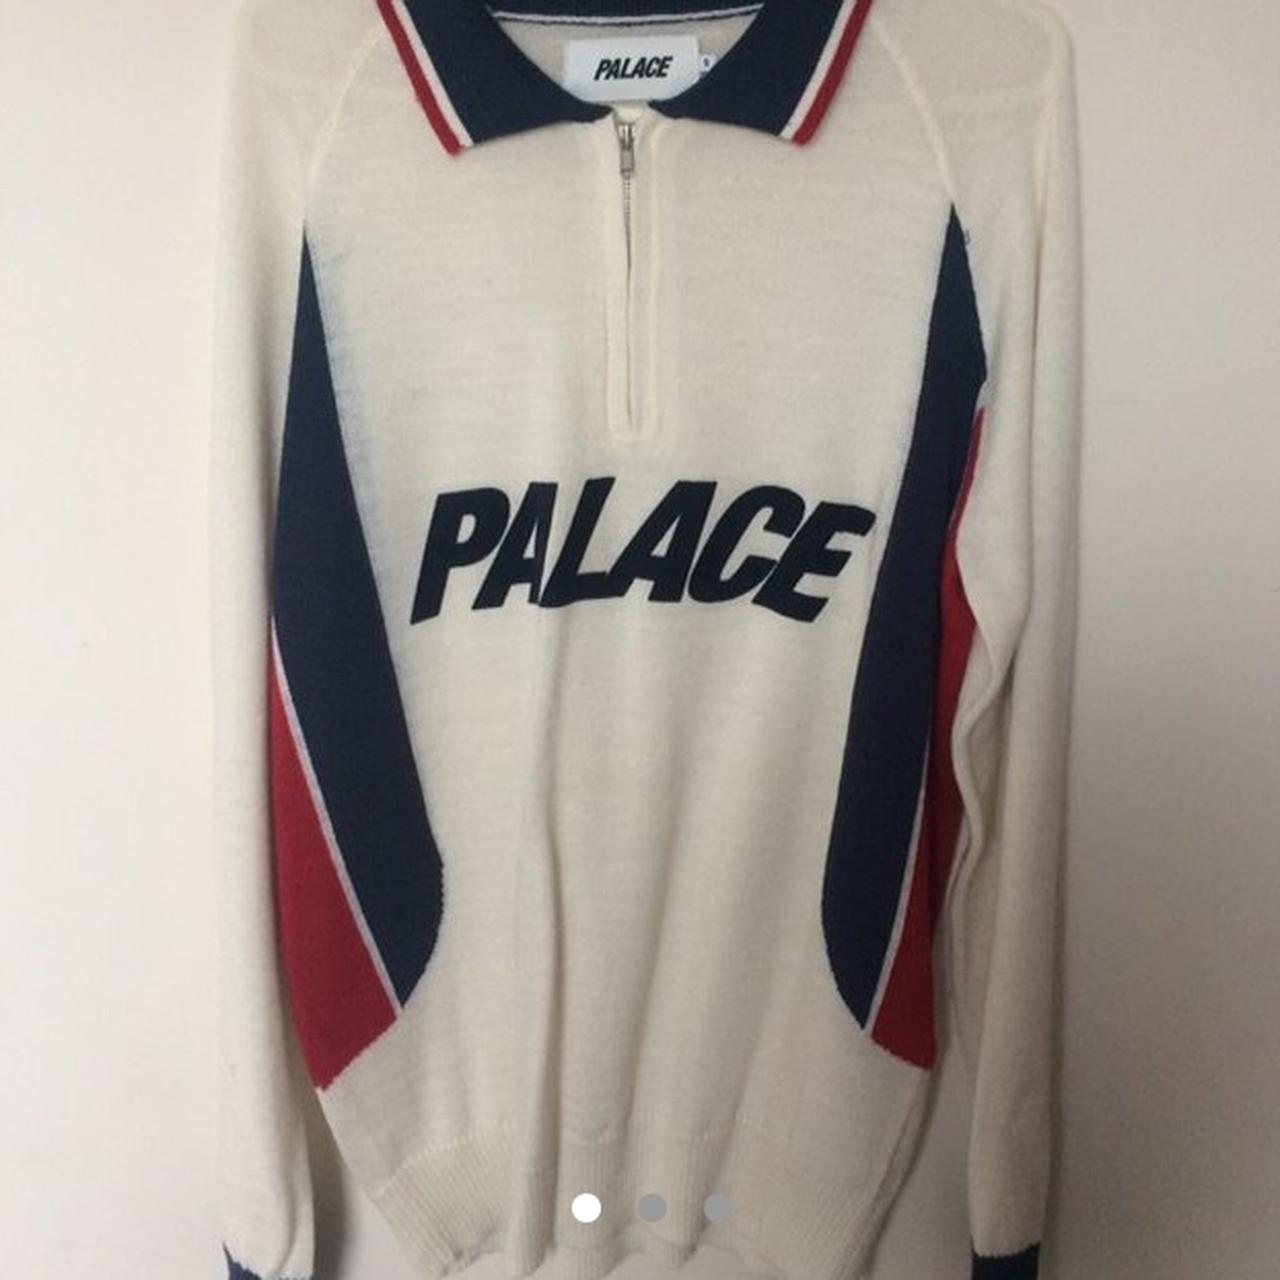 Palace polo zip knit size small true to size 9/10 no...